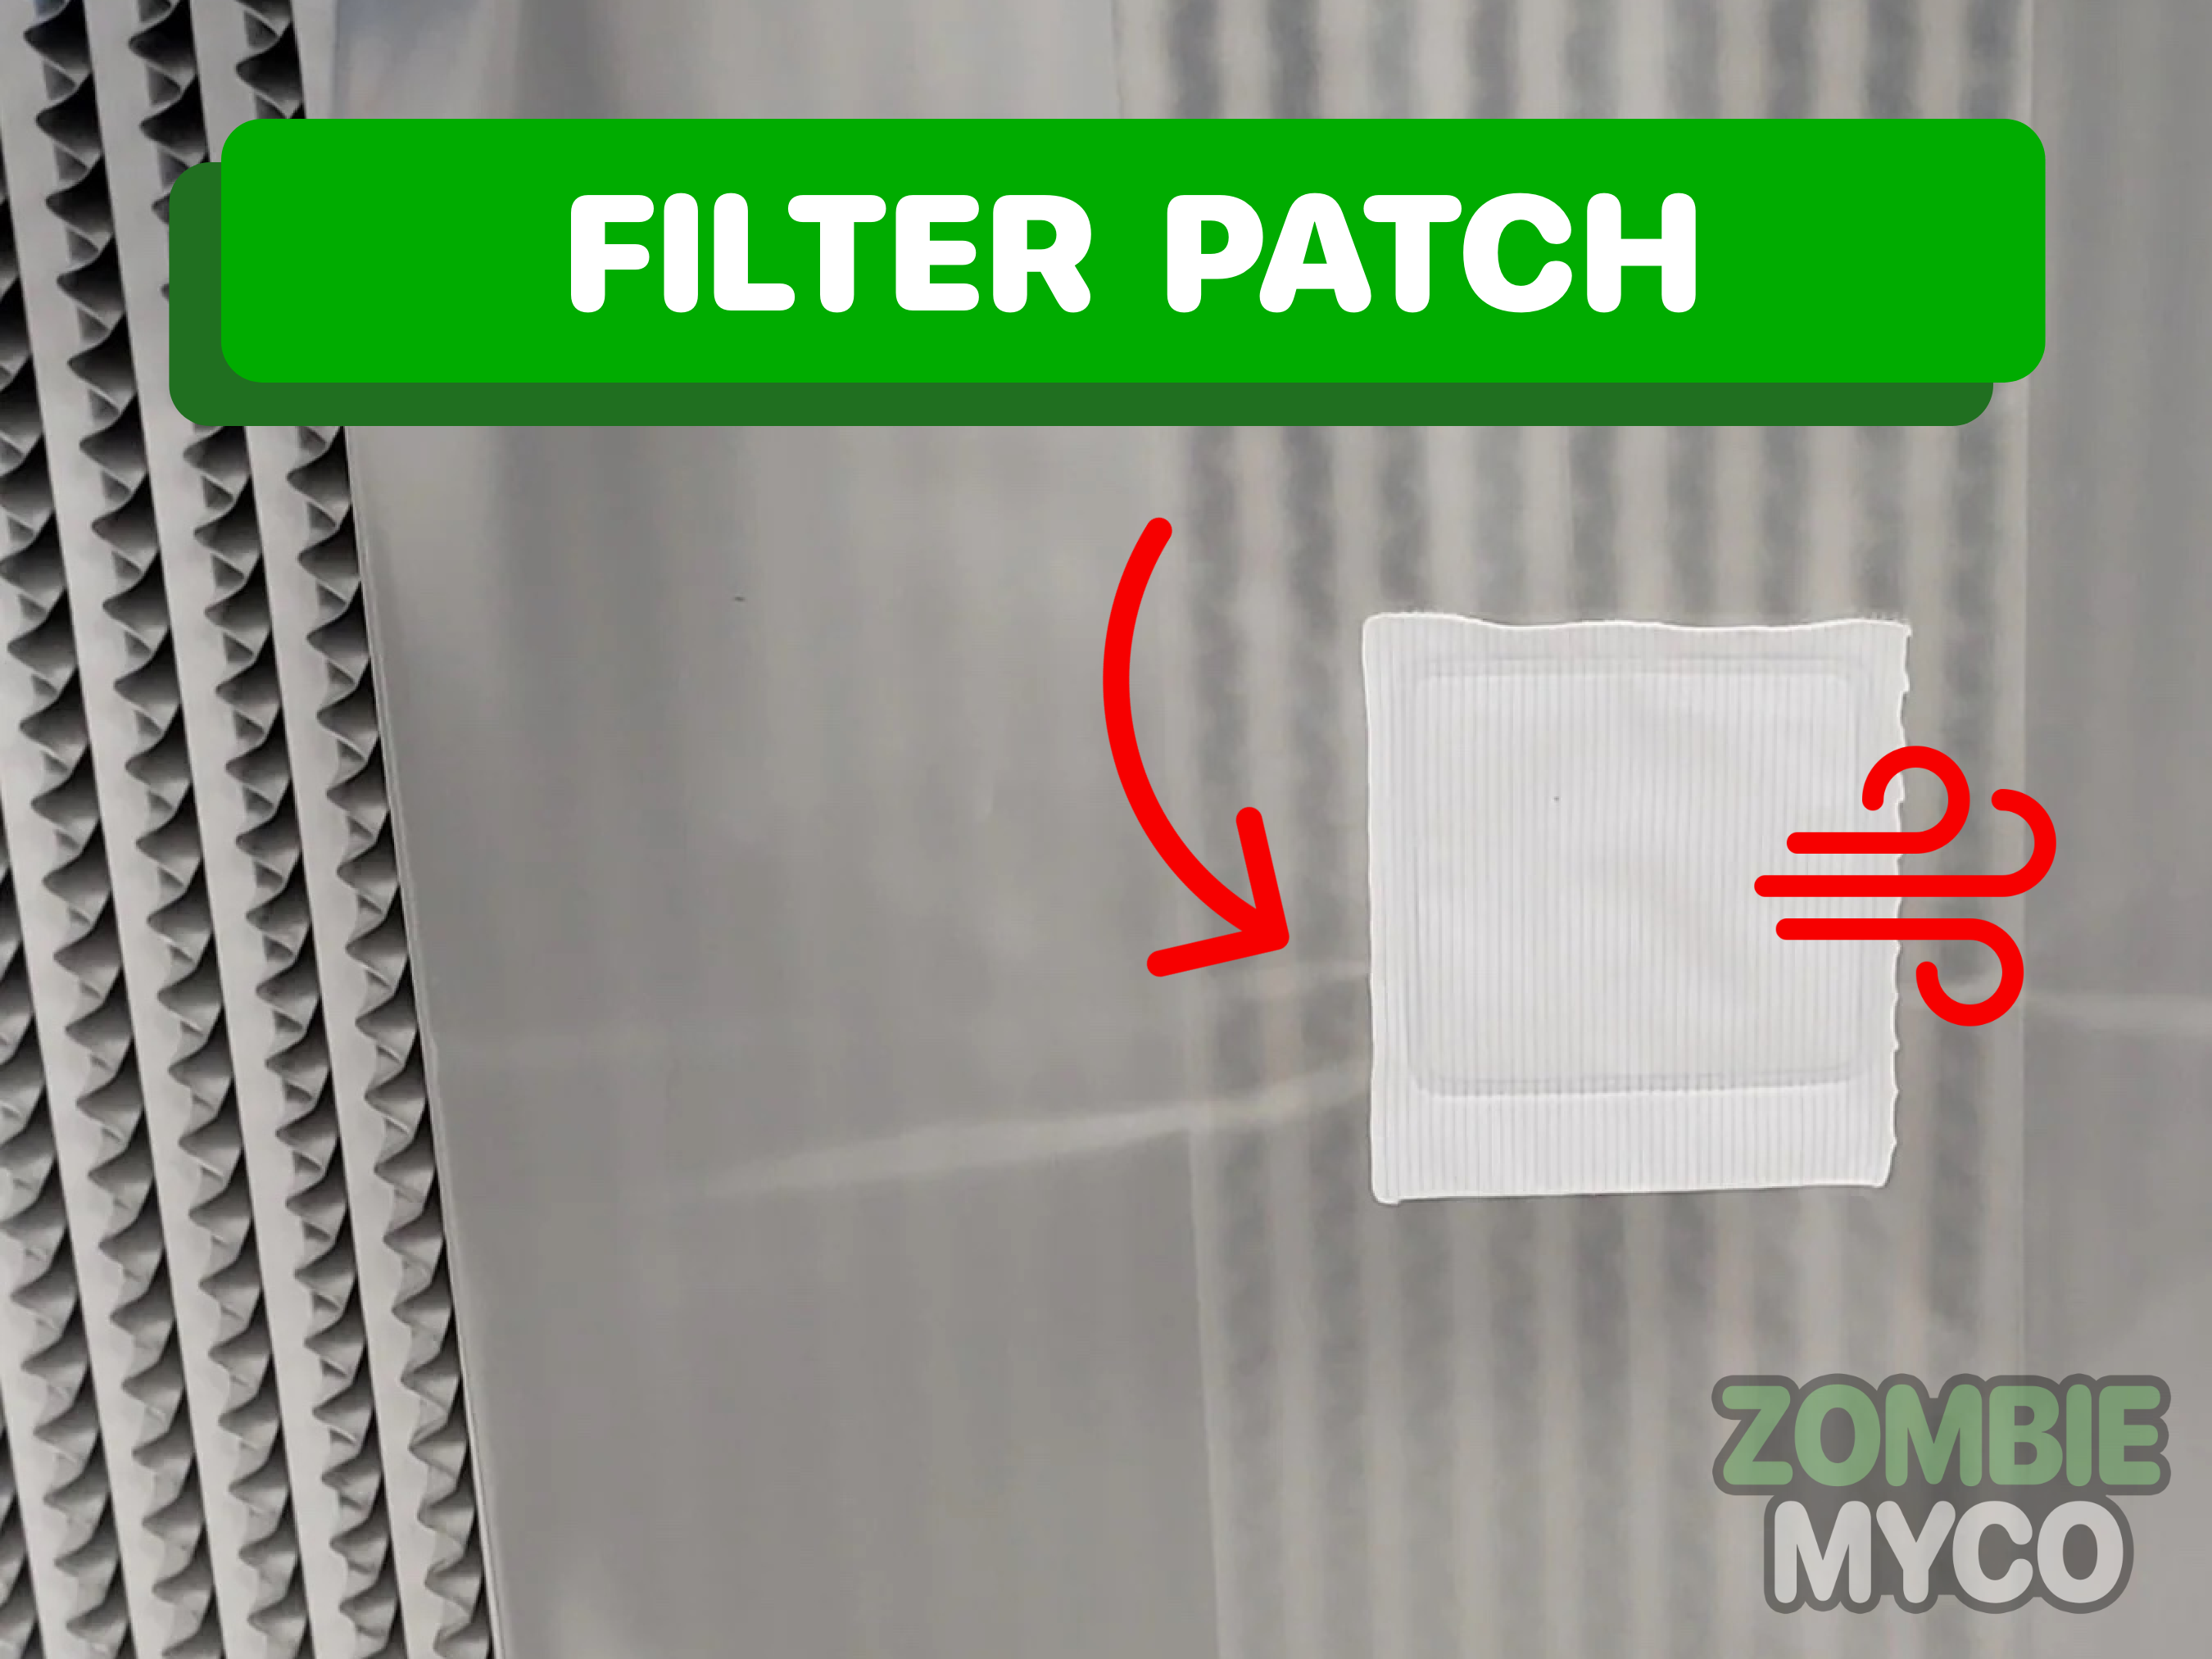 image of the Filter Patch